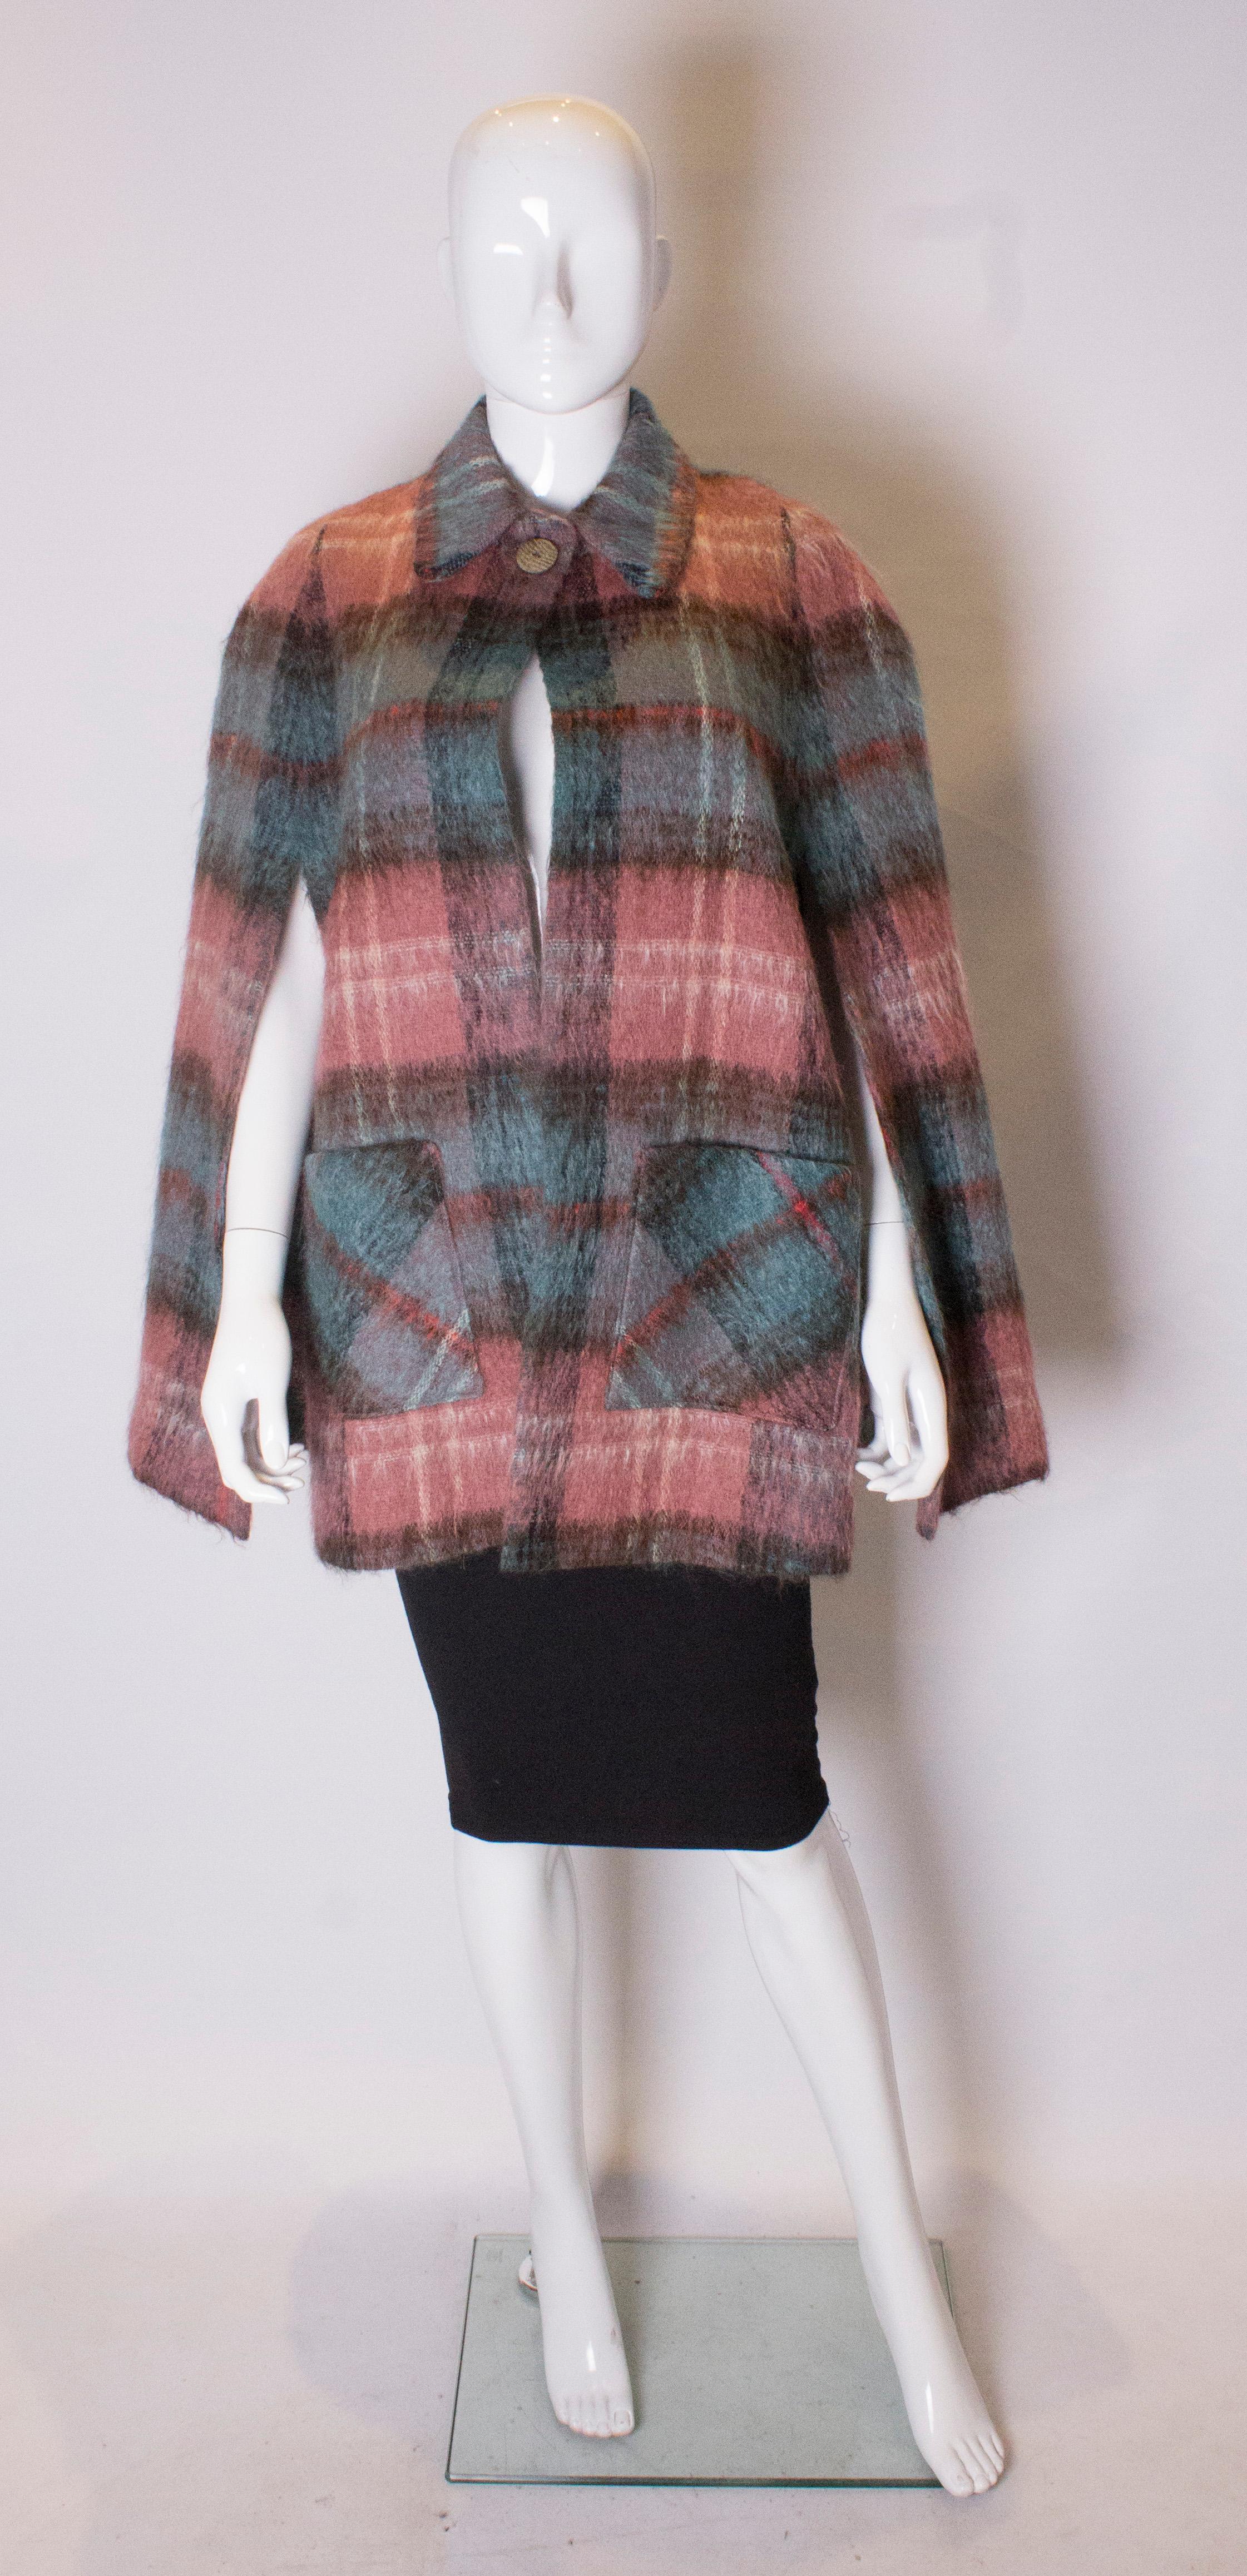 A pretty cape for Fall  by Andrew Stewart. The cape is in a pretty mix of turquoise and pink and has two front pockets and two arm slits.
Measurements , shoulder to shoulder 22'' , length 31''  Fabric 40% mohair, 60% wool